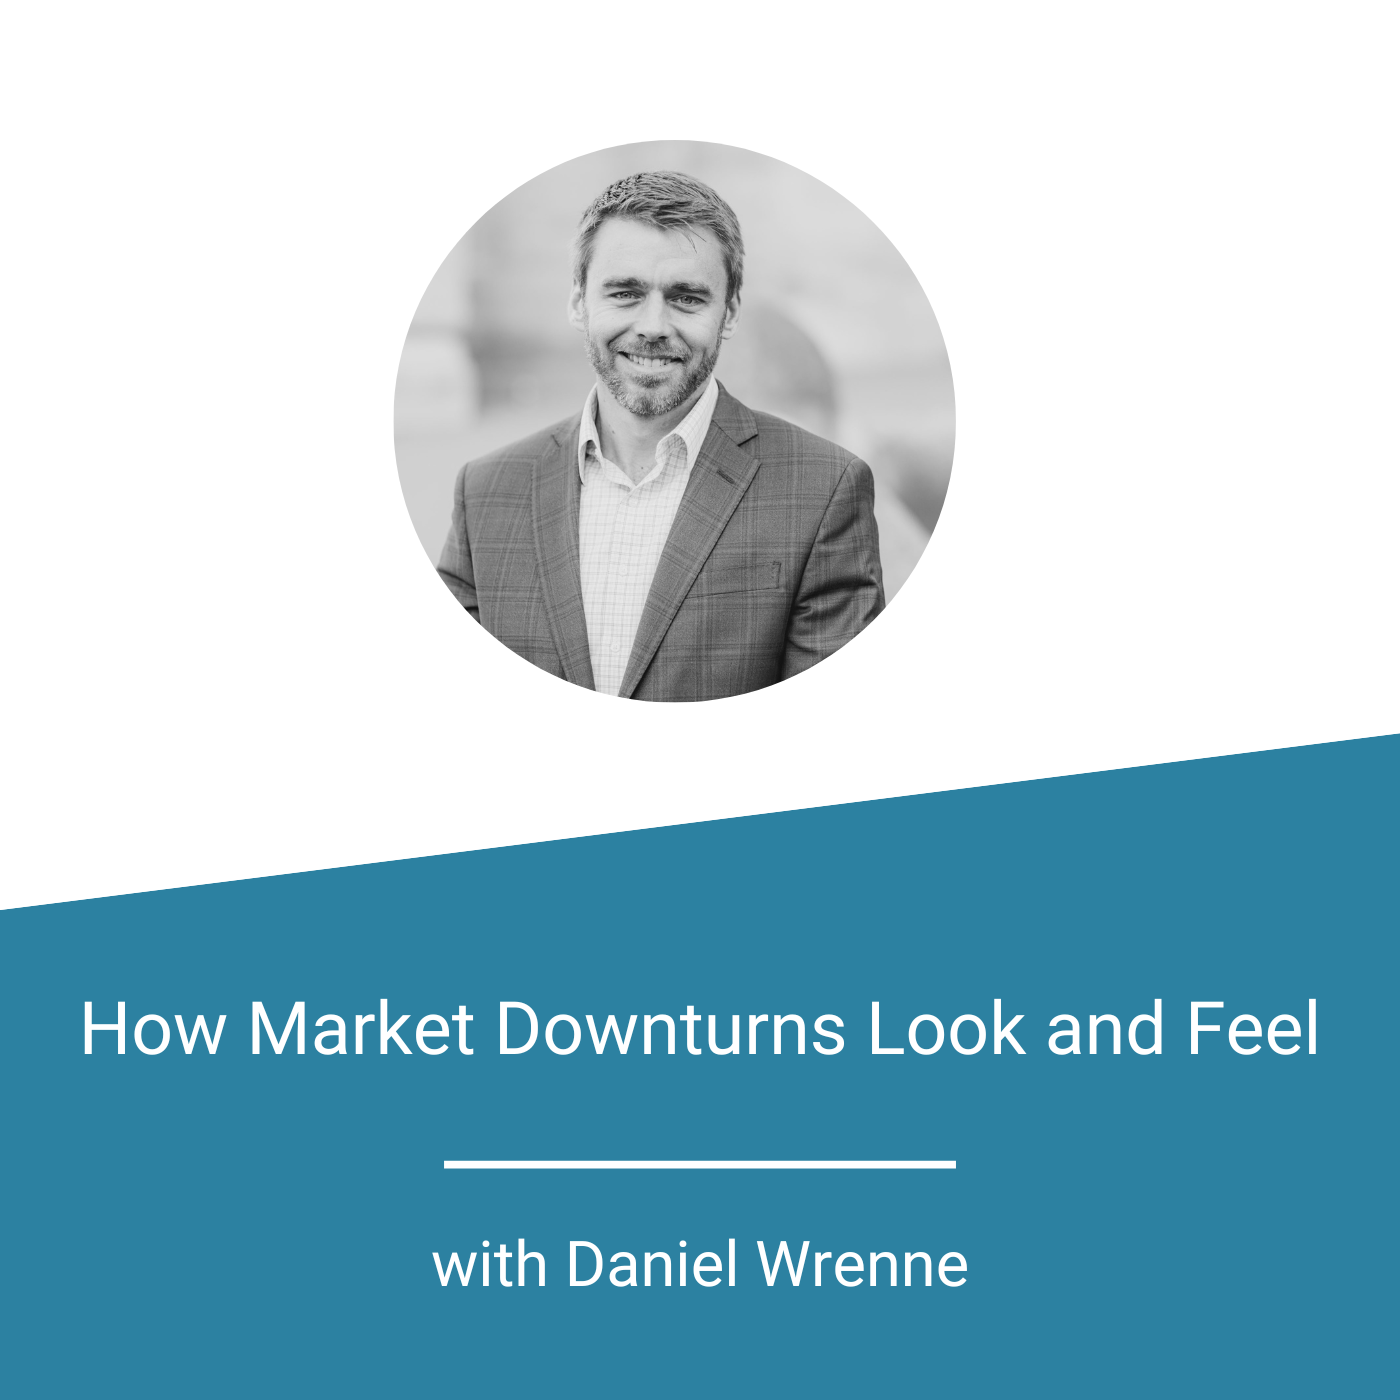 How Market Downturns Look and Feel